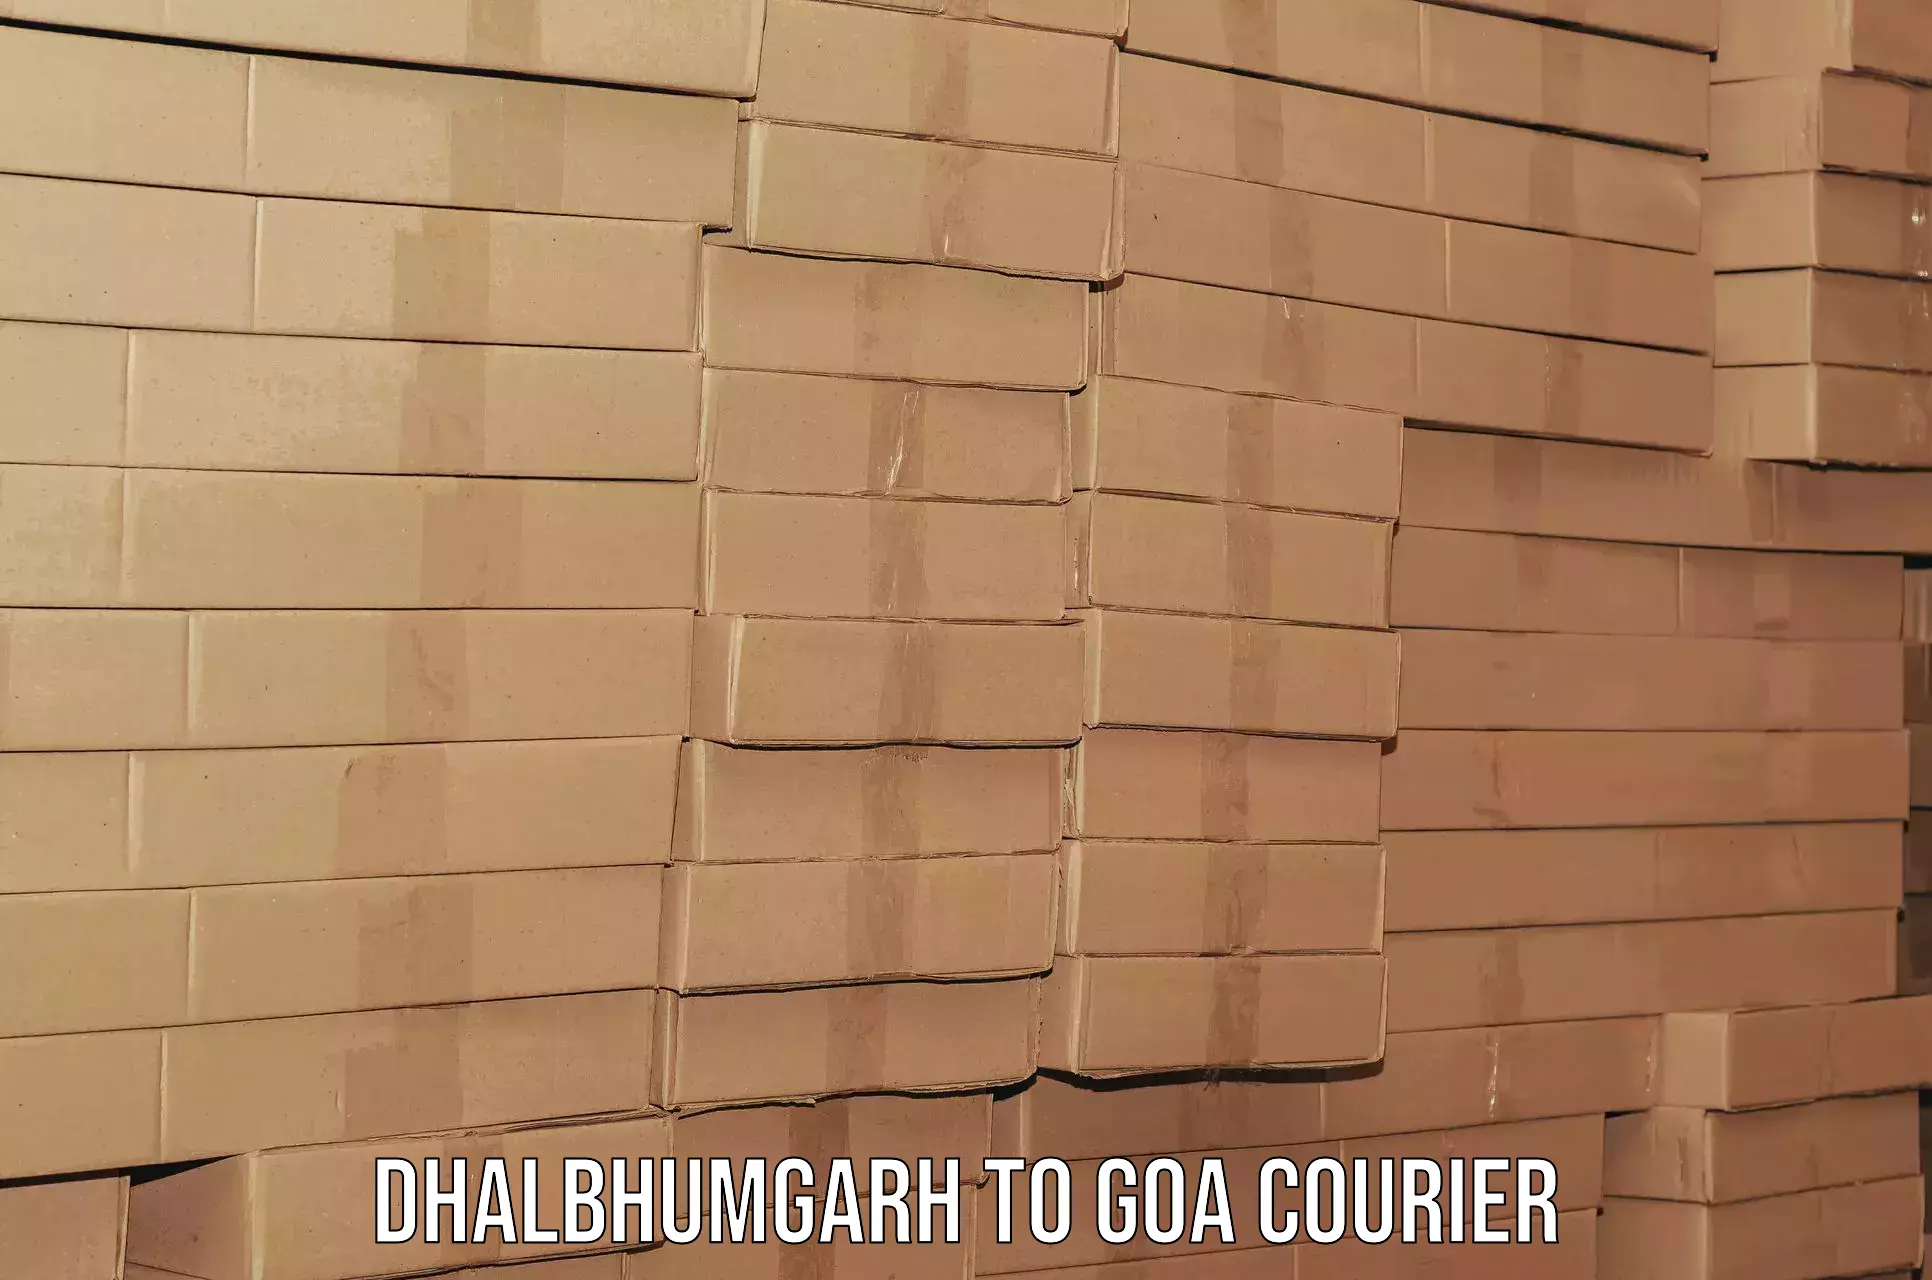 Furniture delivery service Dhalbhumgarh to Goa